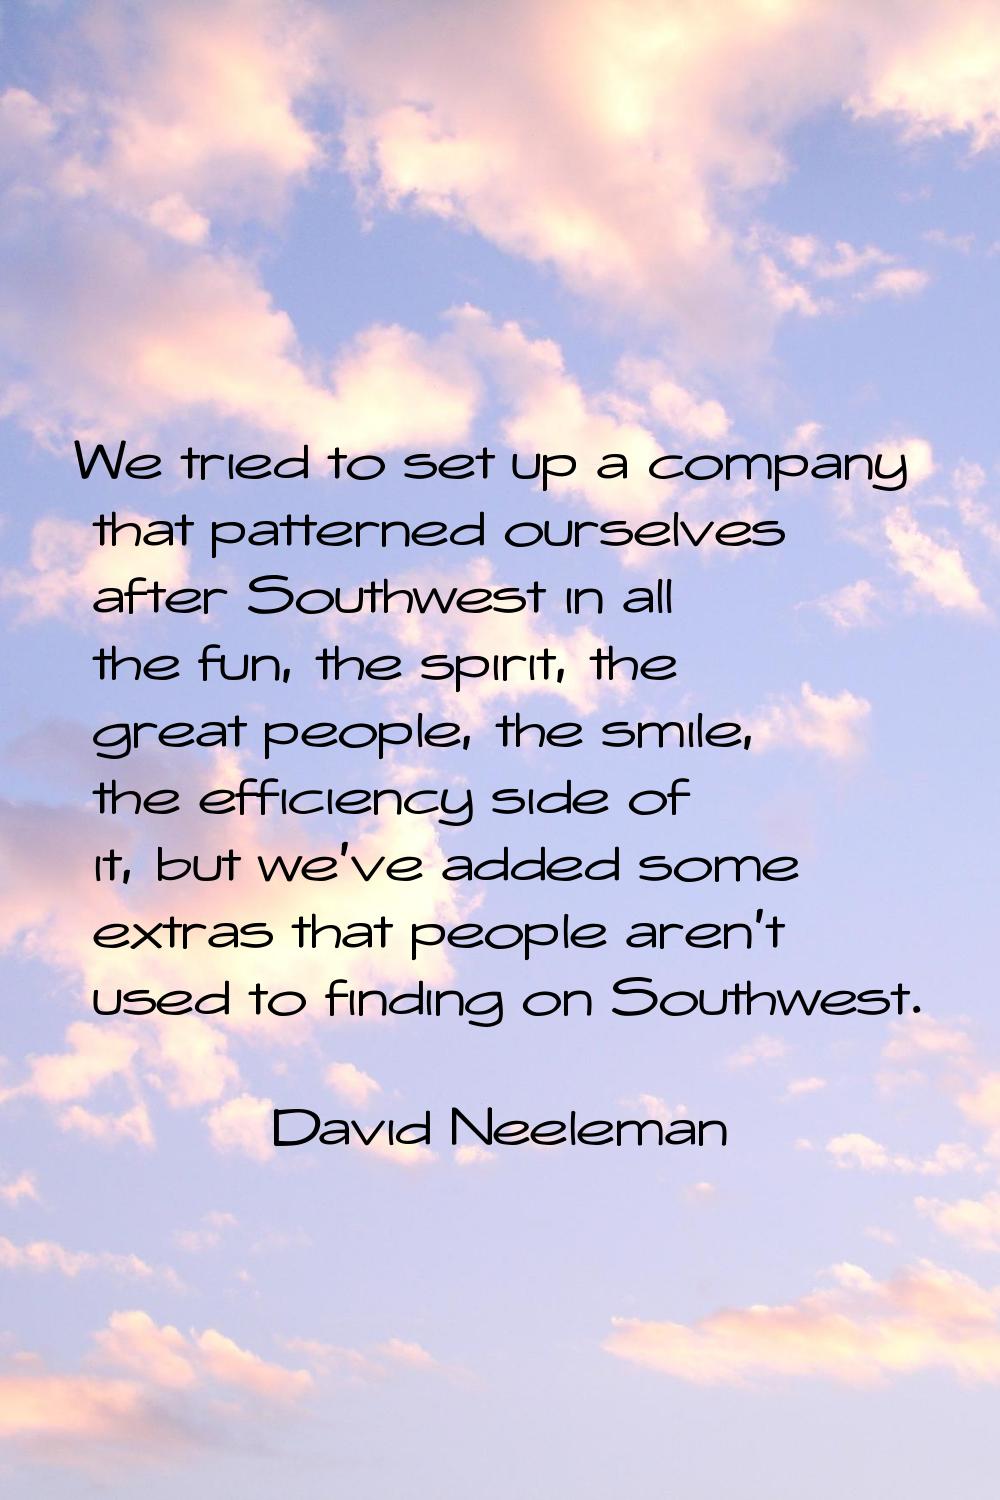 We tried to set up a company that patterned ourselves after Southwest in all the fun, the spirit, t